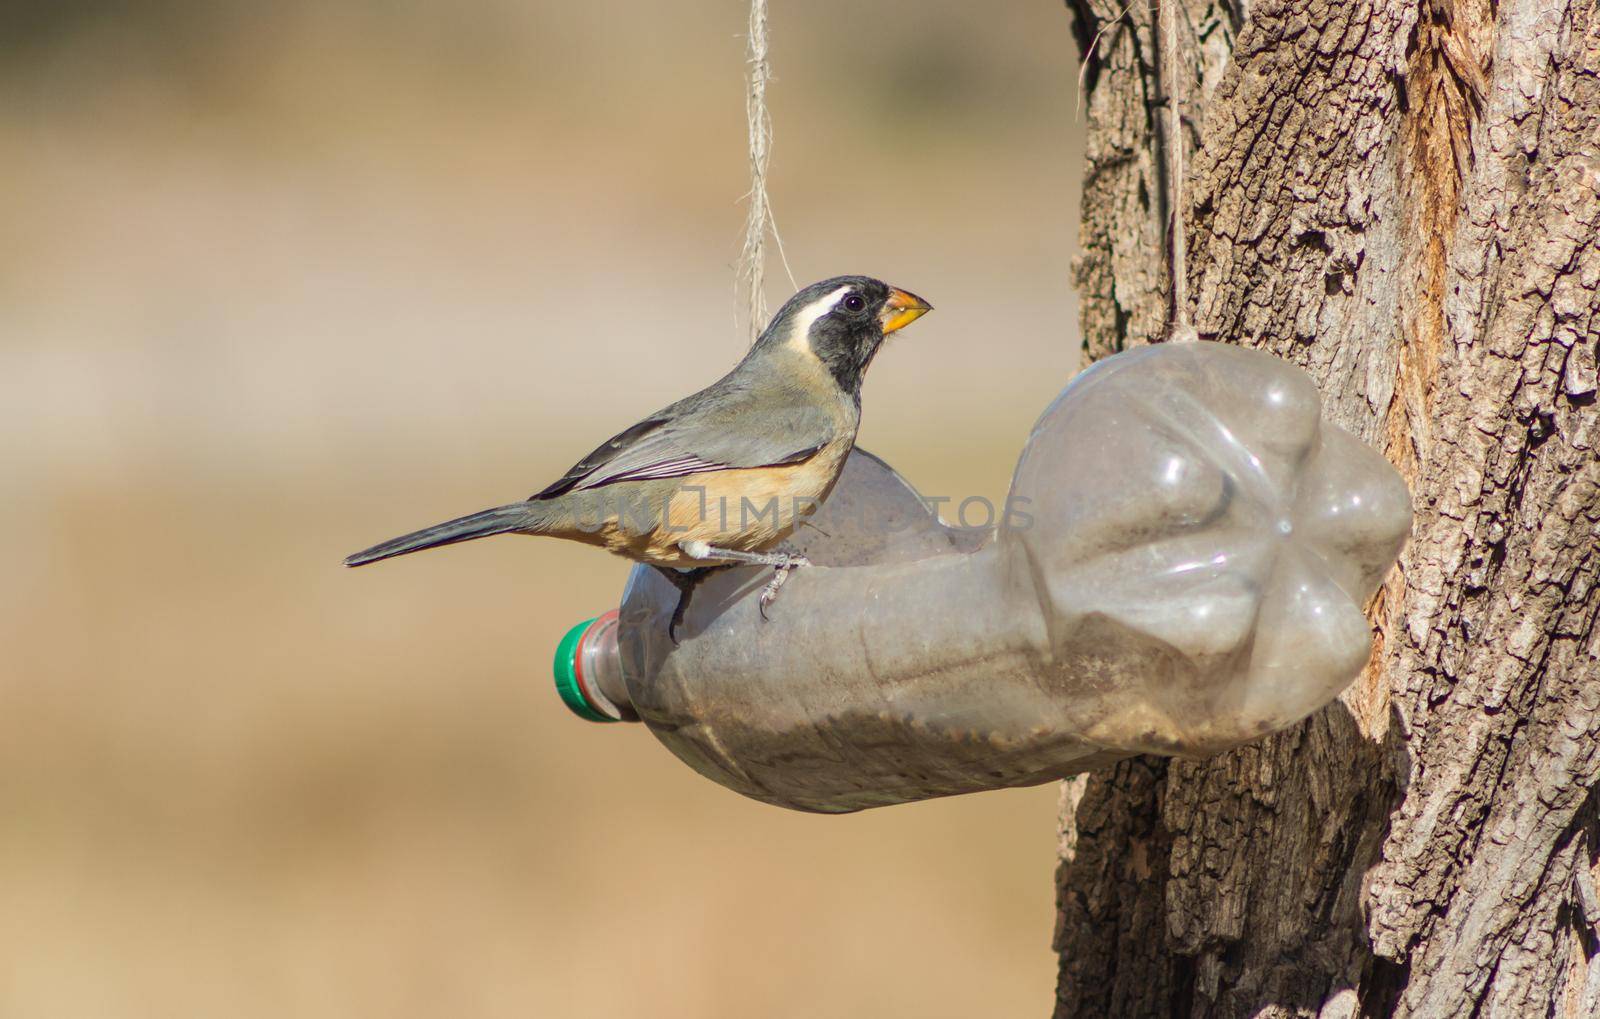 a Saltator aurantiirostris eating from the recycled bottle eater by GabrielaBertolini